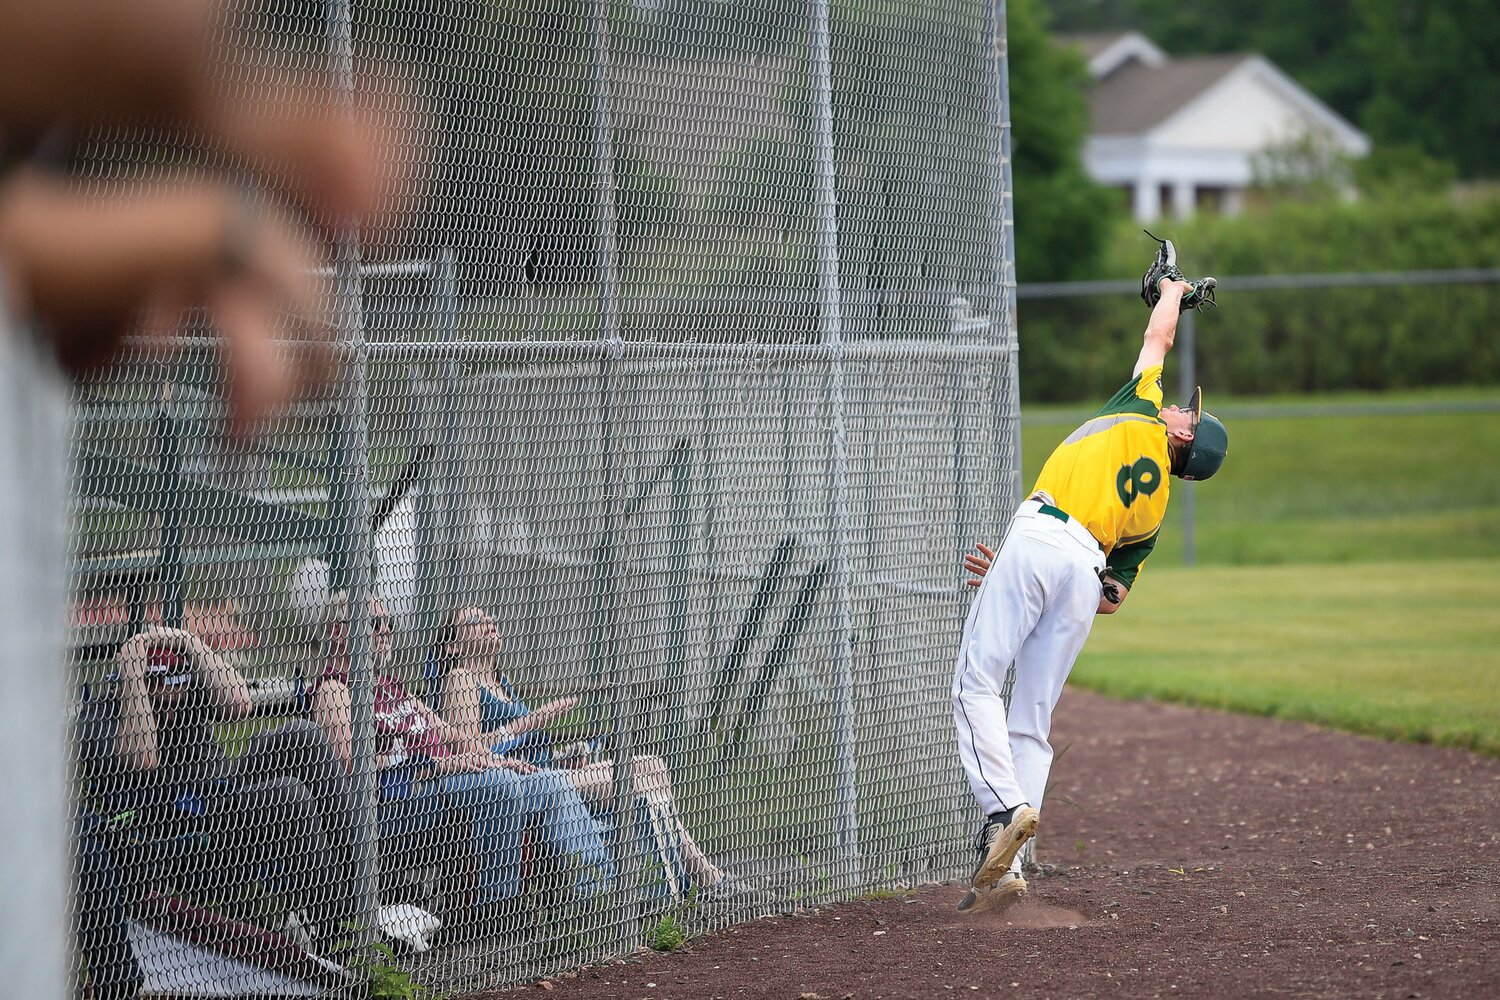 Nor-Gwyn’s Jeremiah Criger makes a nice grab on a foul ball as fans take cover during the fifth inning of Game 1 Sunday.